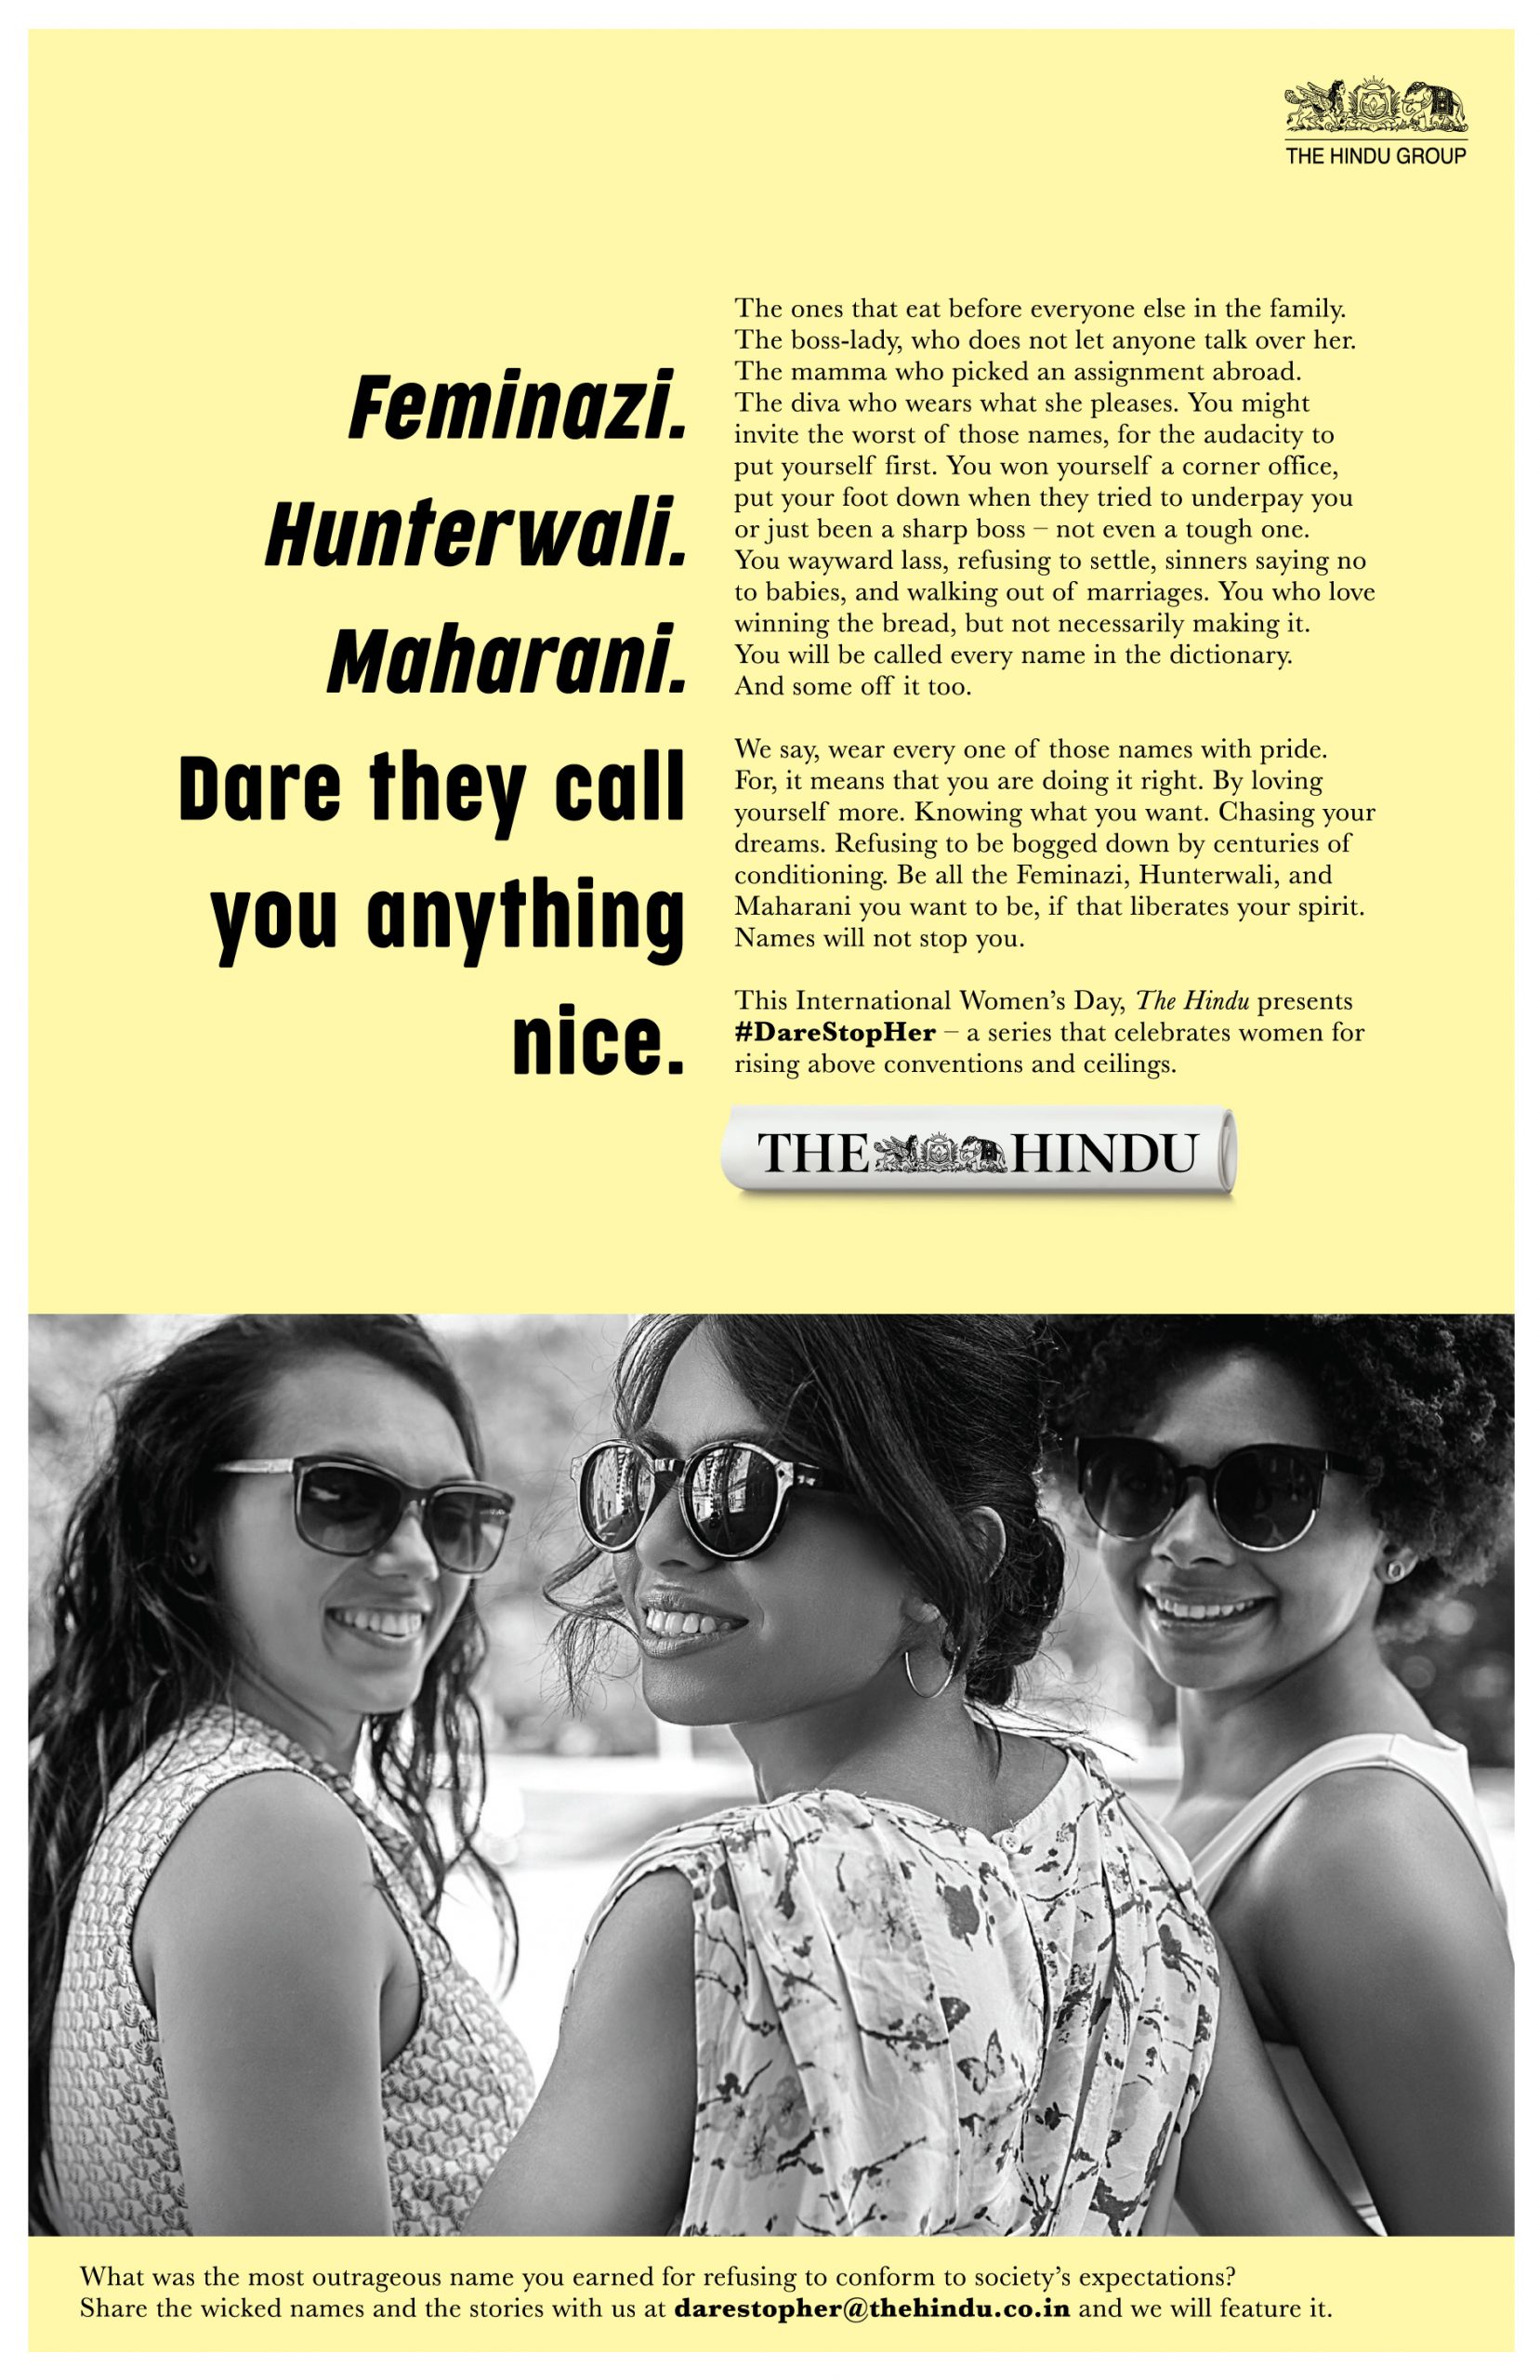 Ogilvy and The Hindu launches #DareStopHer